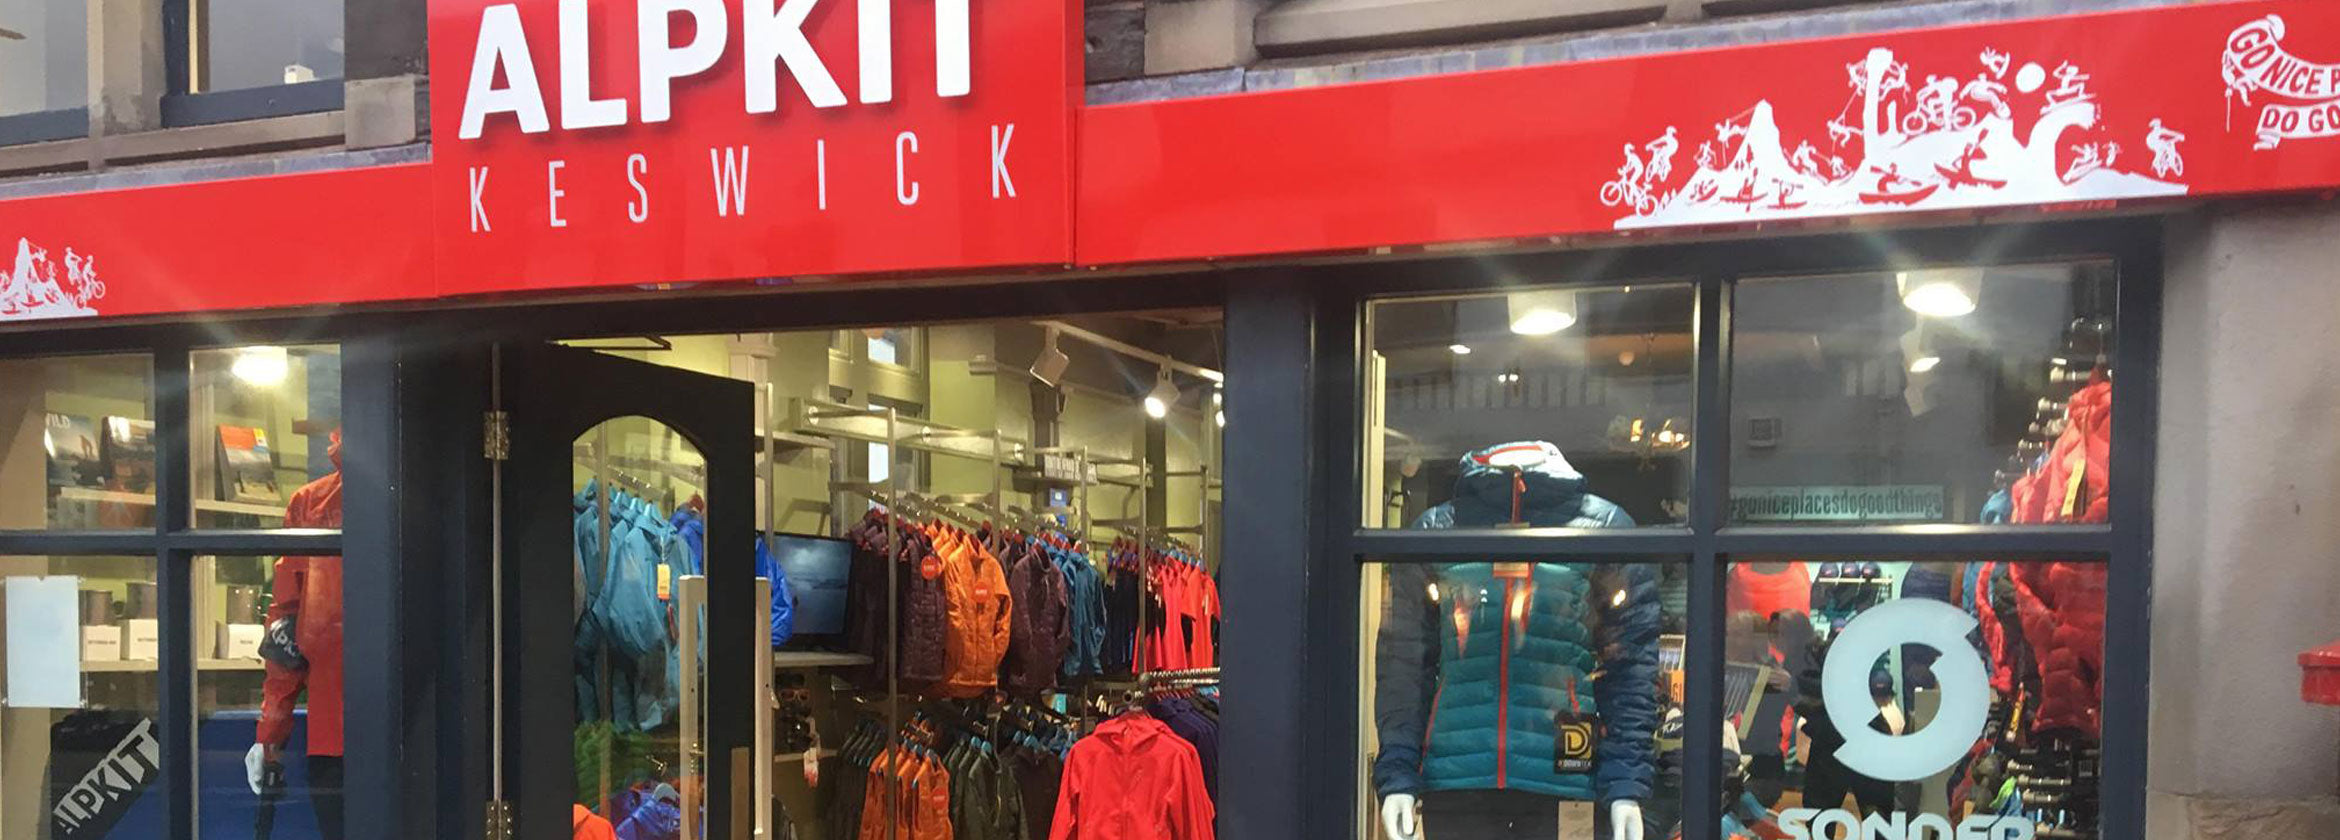 Alpkit Keswick Outdoor Clothing, Camping Equipment & Bicycle Shop